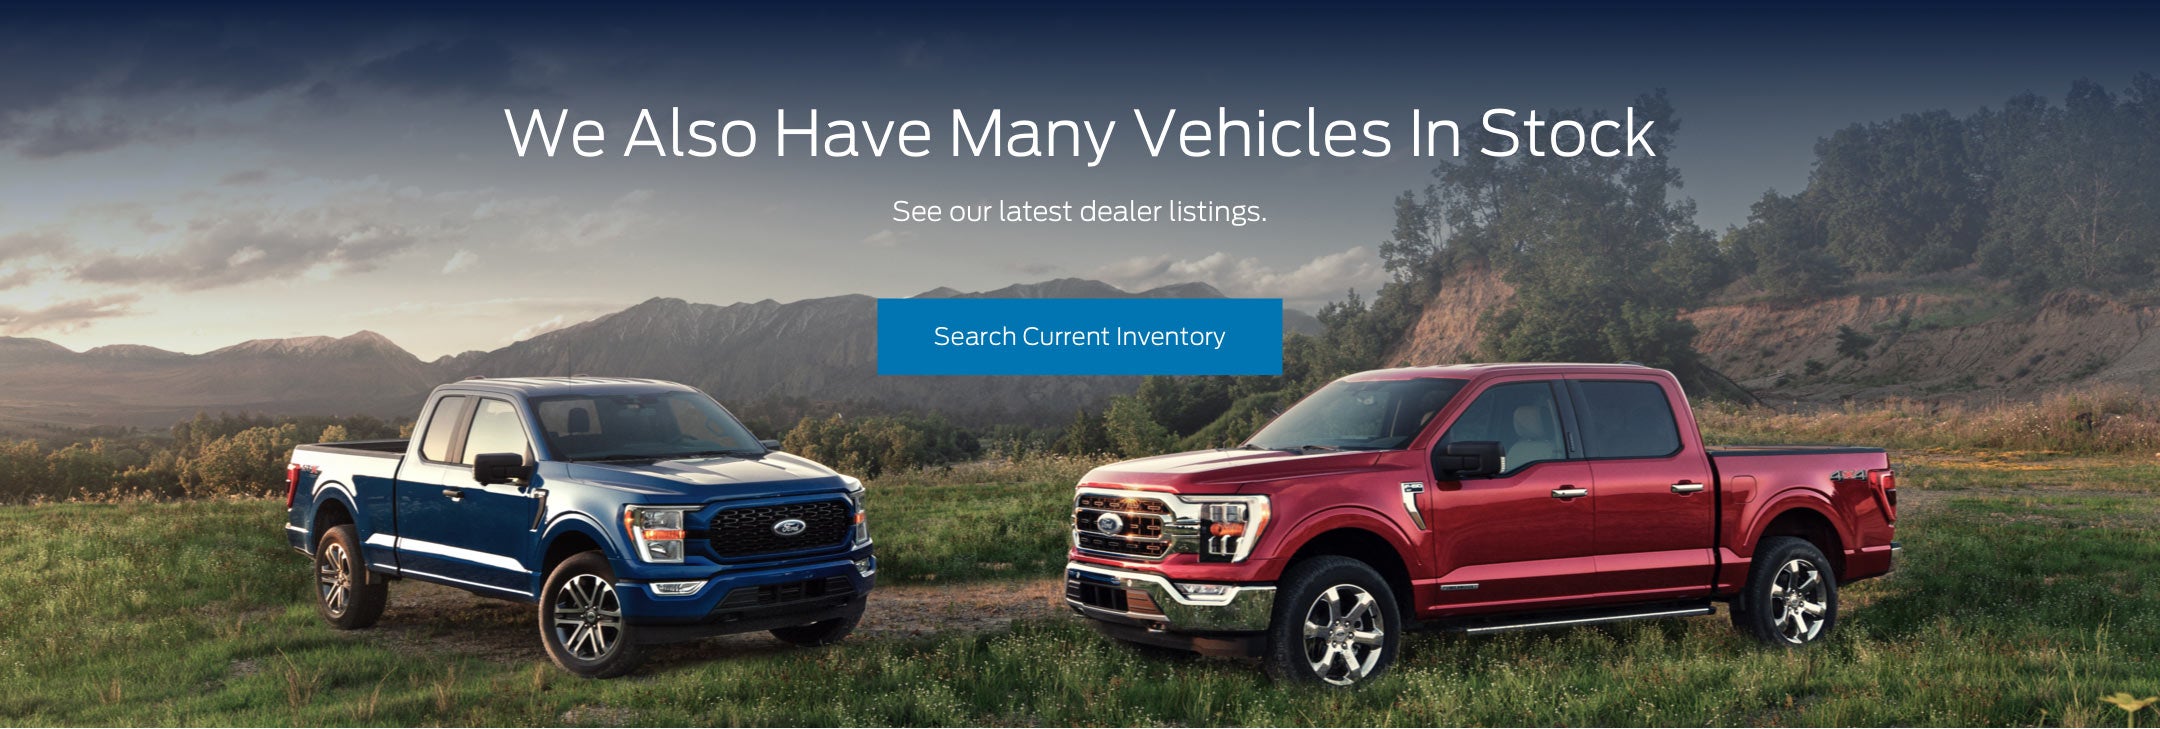 Ford vehicles in stock | Devils Lake Ford in Devils Lake ND